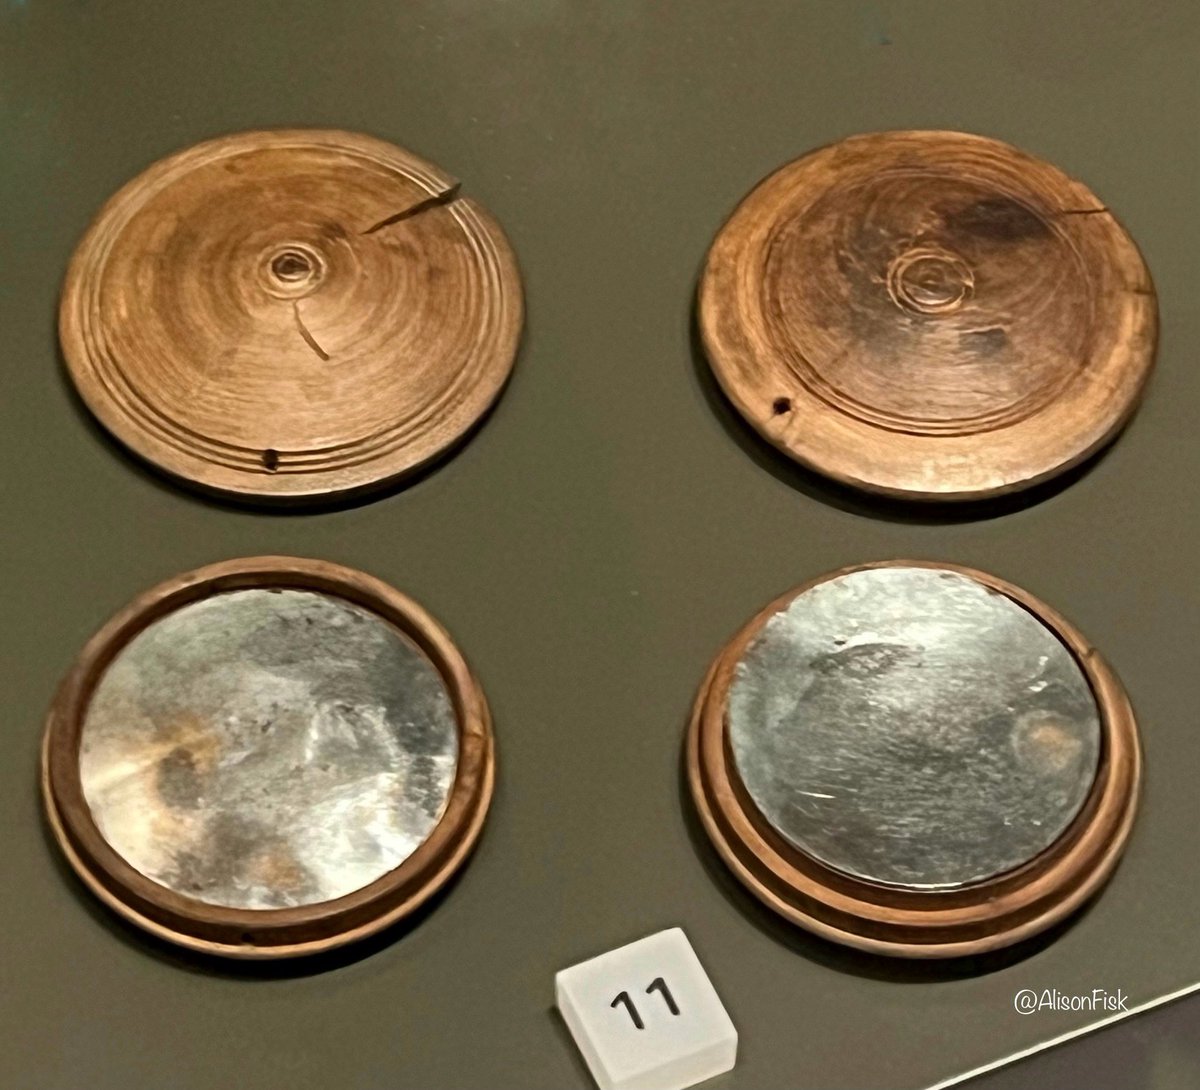 A rare pair of Egyptian compact mirrors. Look quite modern for almost 2,000 years old! 🤩 Made of tinned copper, the mirrors are held in beautifully turned wooden cases and form a set: convex for magnifying, concave for seeing the entire face. From Roman period Hawara.…